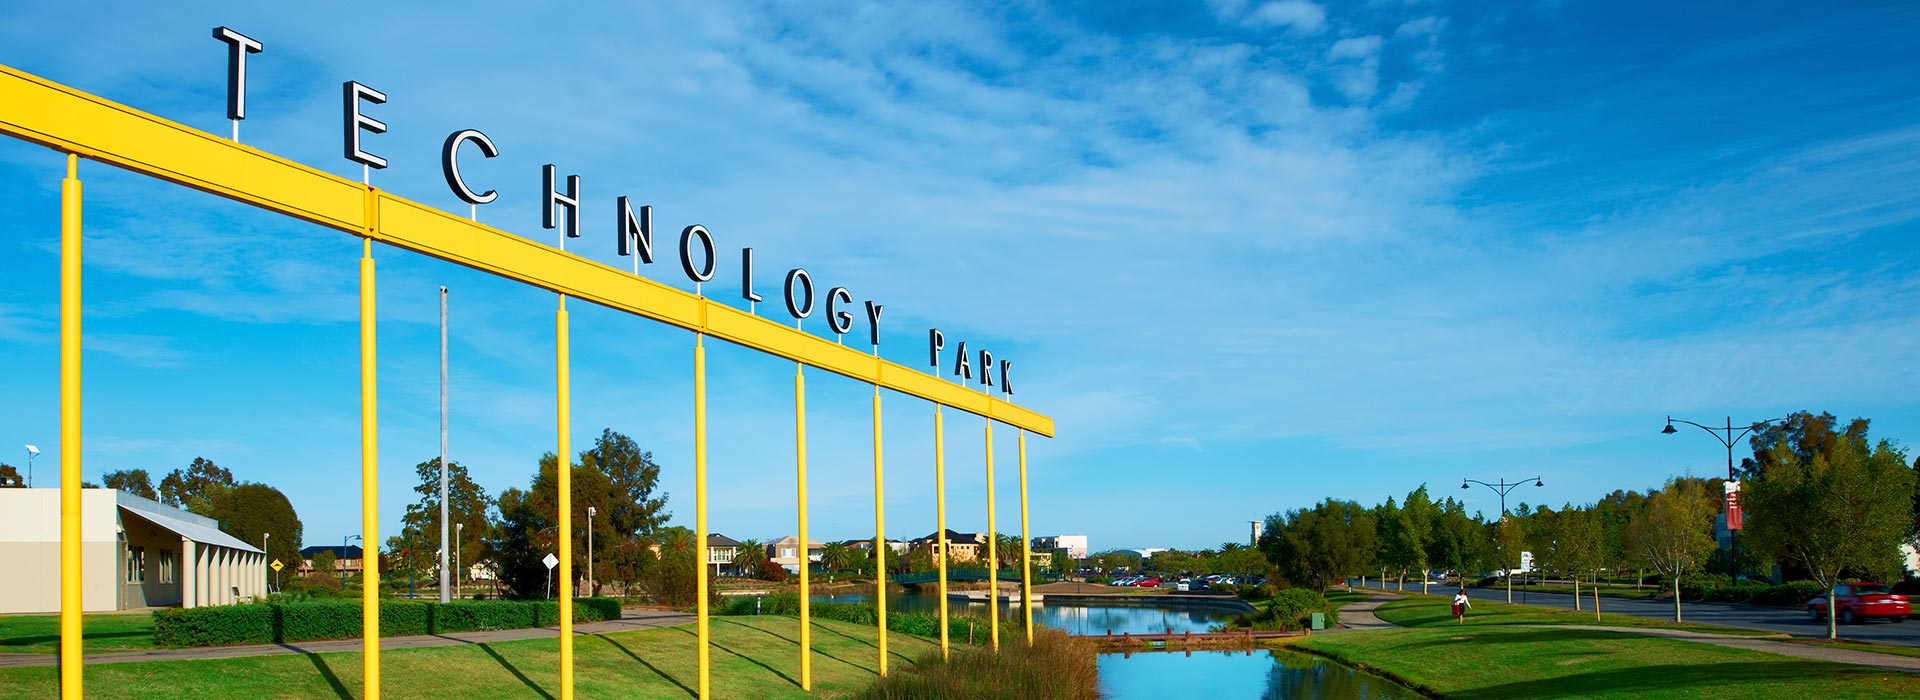 The Technology Park sign at Mawson Lakes